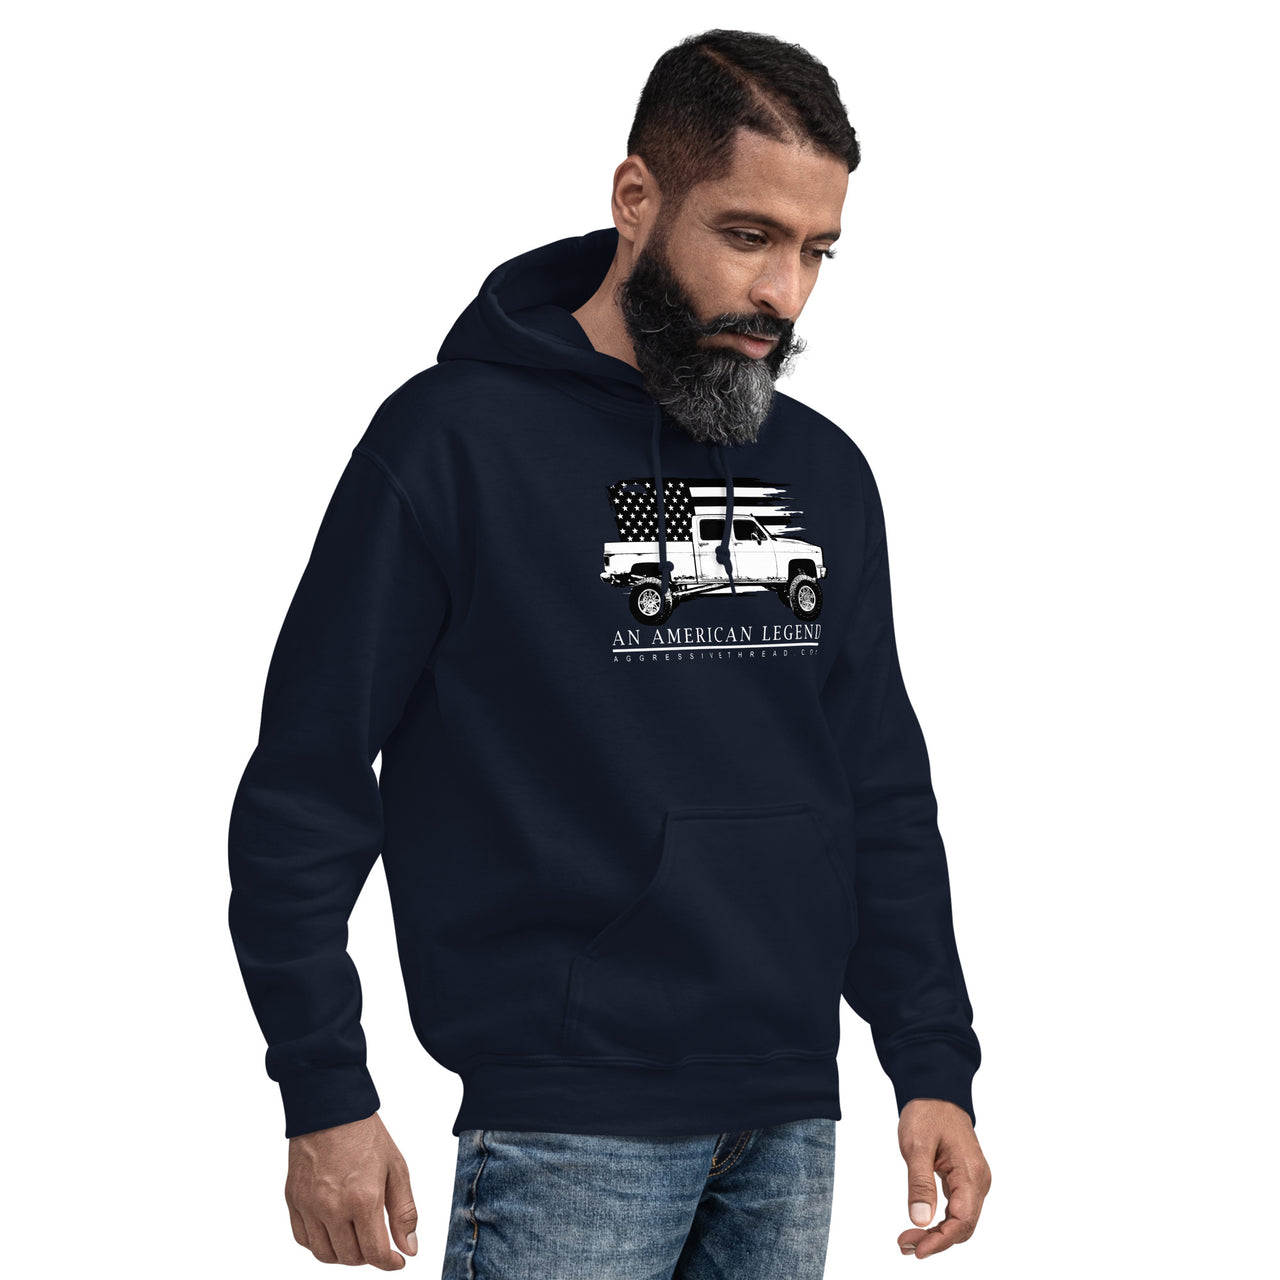 man modeling a Square Body Truck Hoodie in navy